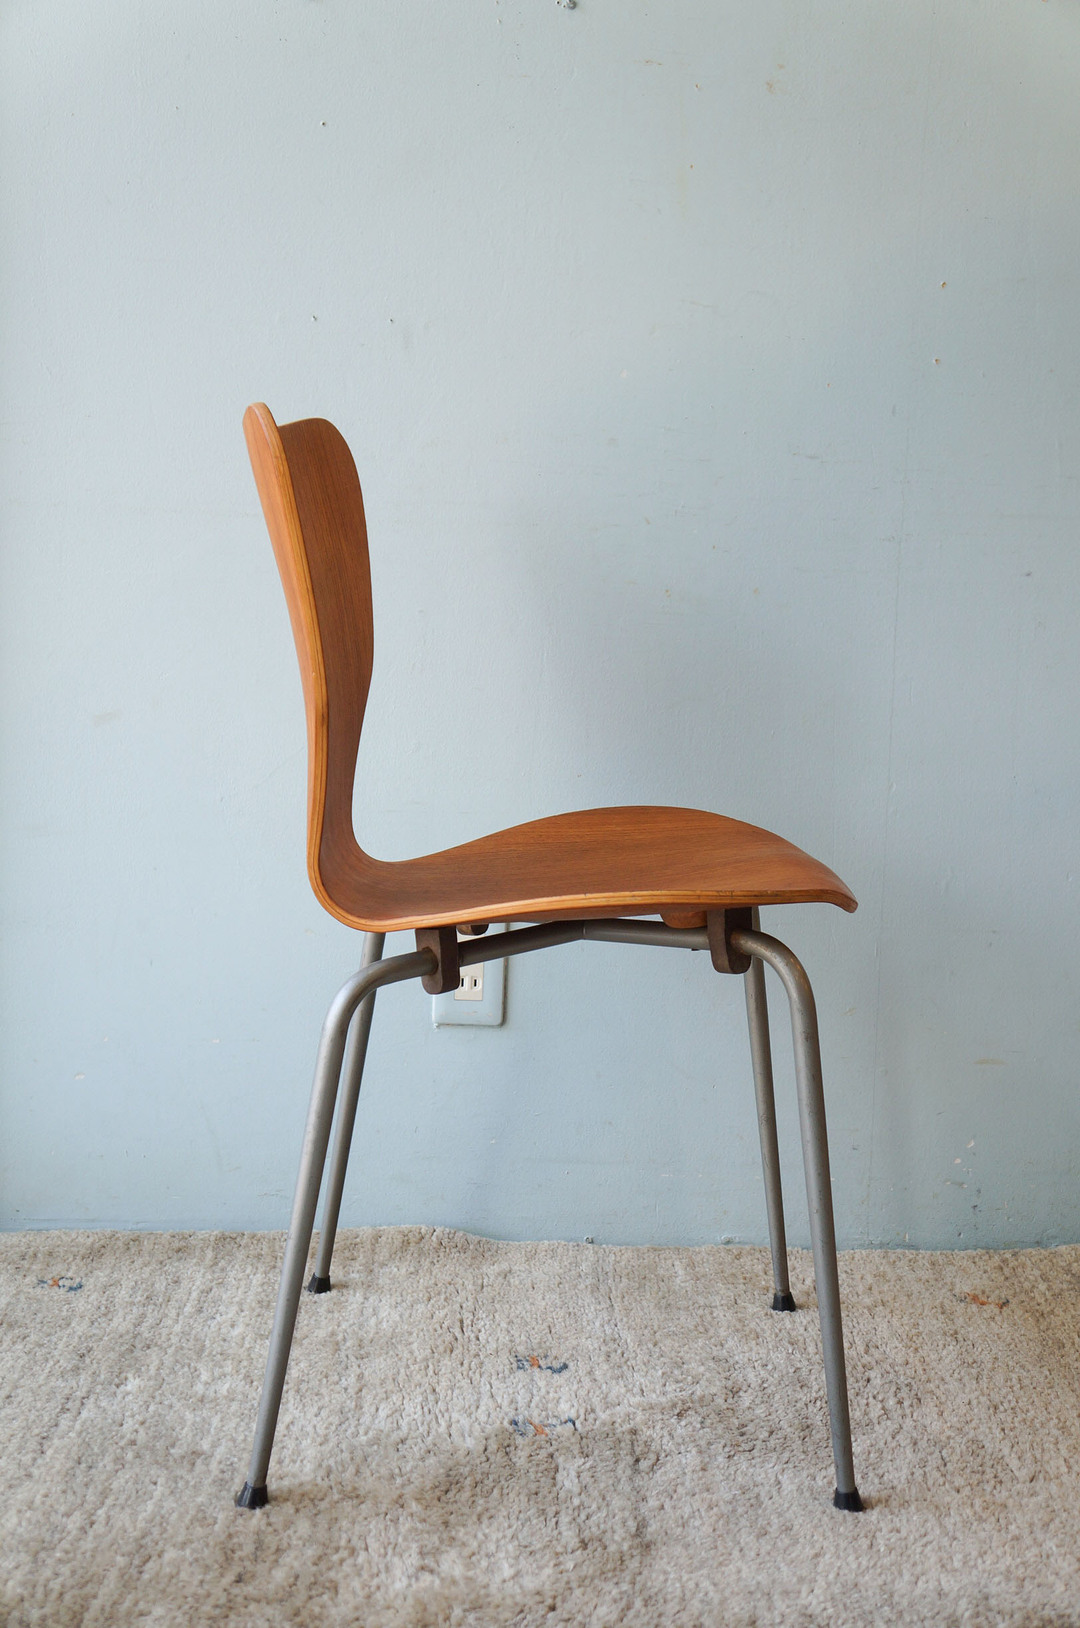 Danish Vintage Teak Plywood Stacking Chair MH Stålmøbler/デンマークヴィンテージ スタッキングチェア チーク材 プライウッド 椅子 ミッドセンチュリー モダン 北欧家具 6